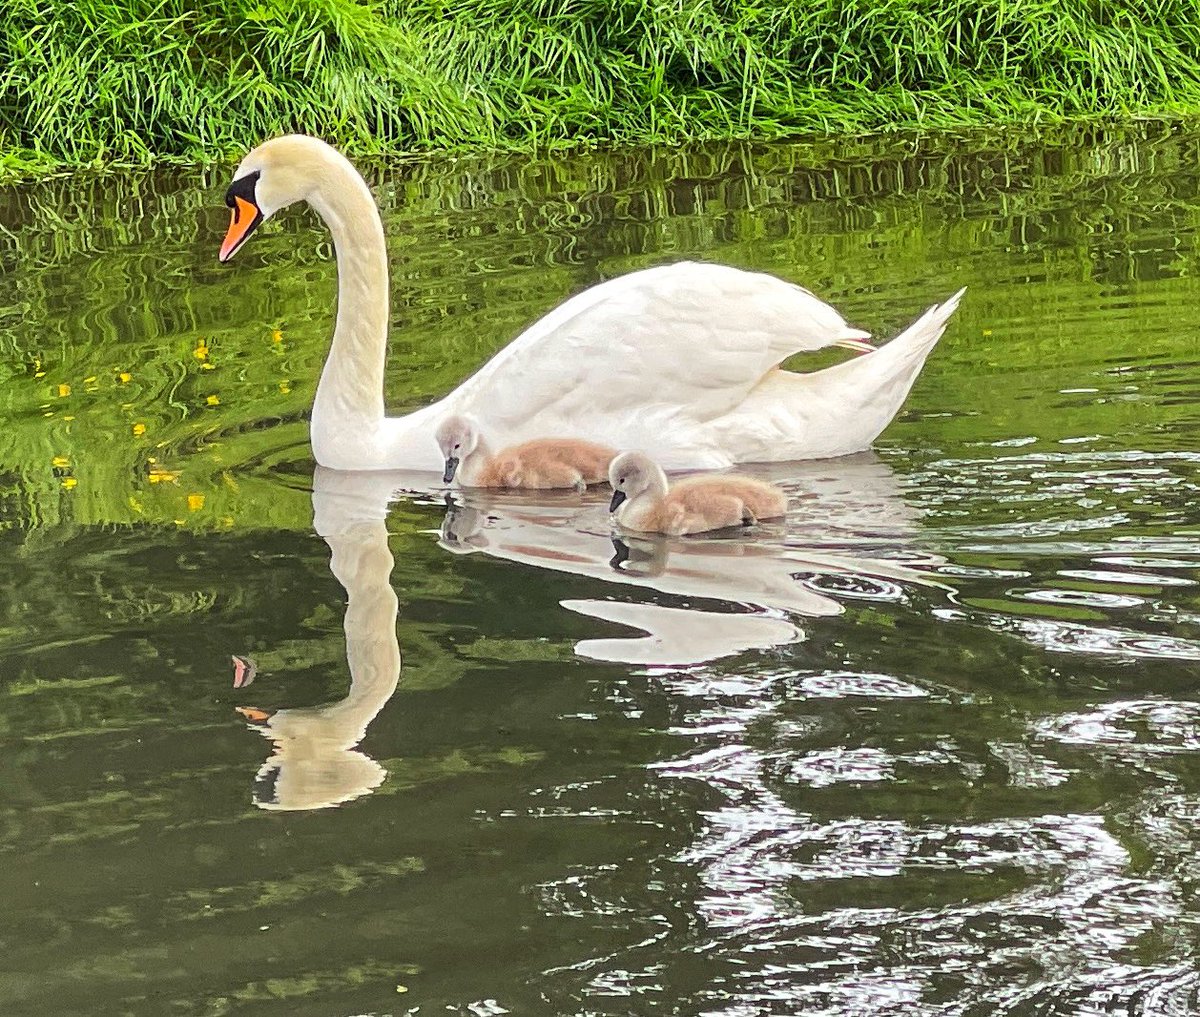 Lots of birds and not so many people around for today’s walk 🚶 in the rain ☔️ including a couple of newborn cygnets 🦢 

Day 147 & 1606/1608
#100daysofwalking 
#200daysofwalking
#365daysofwalking
#ThePhotoHour
#StormHour

@AimsirTG4 @deric_tv
#swanday
#photography 
#nature